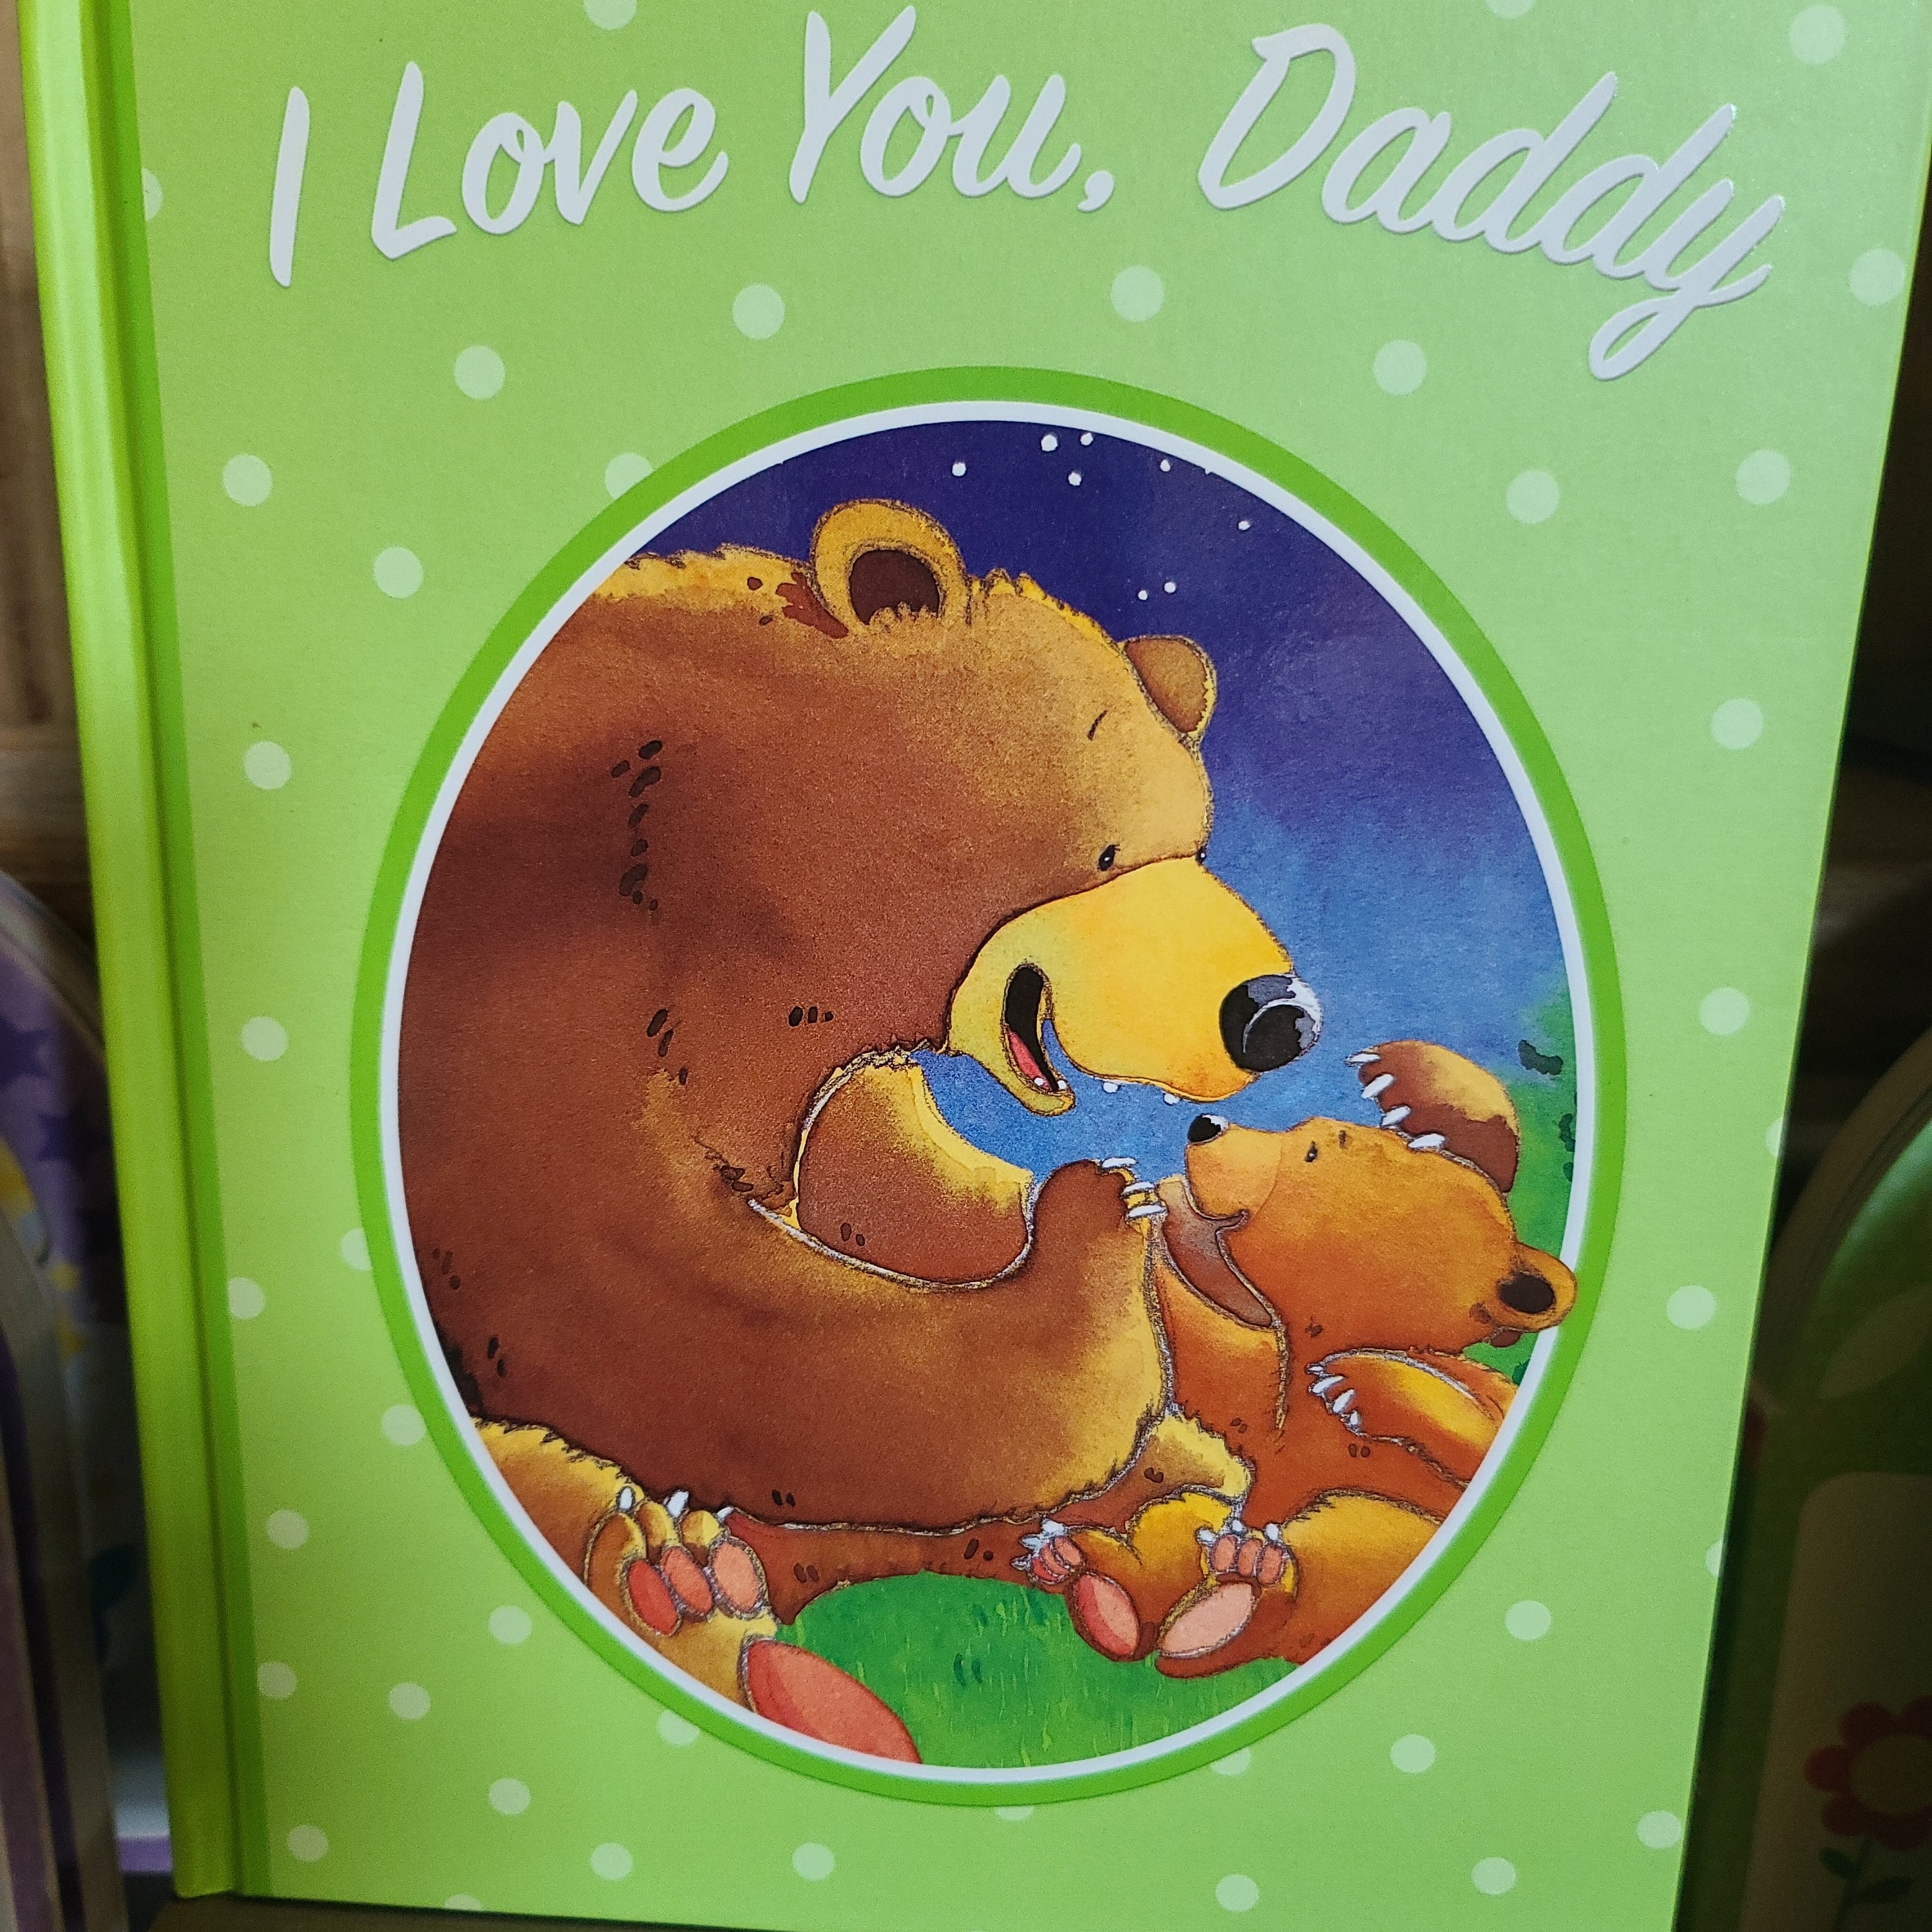 I love you, daddy book